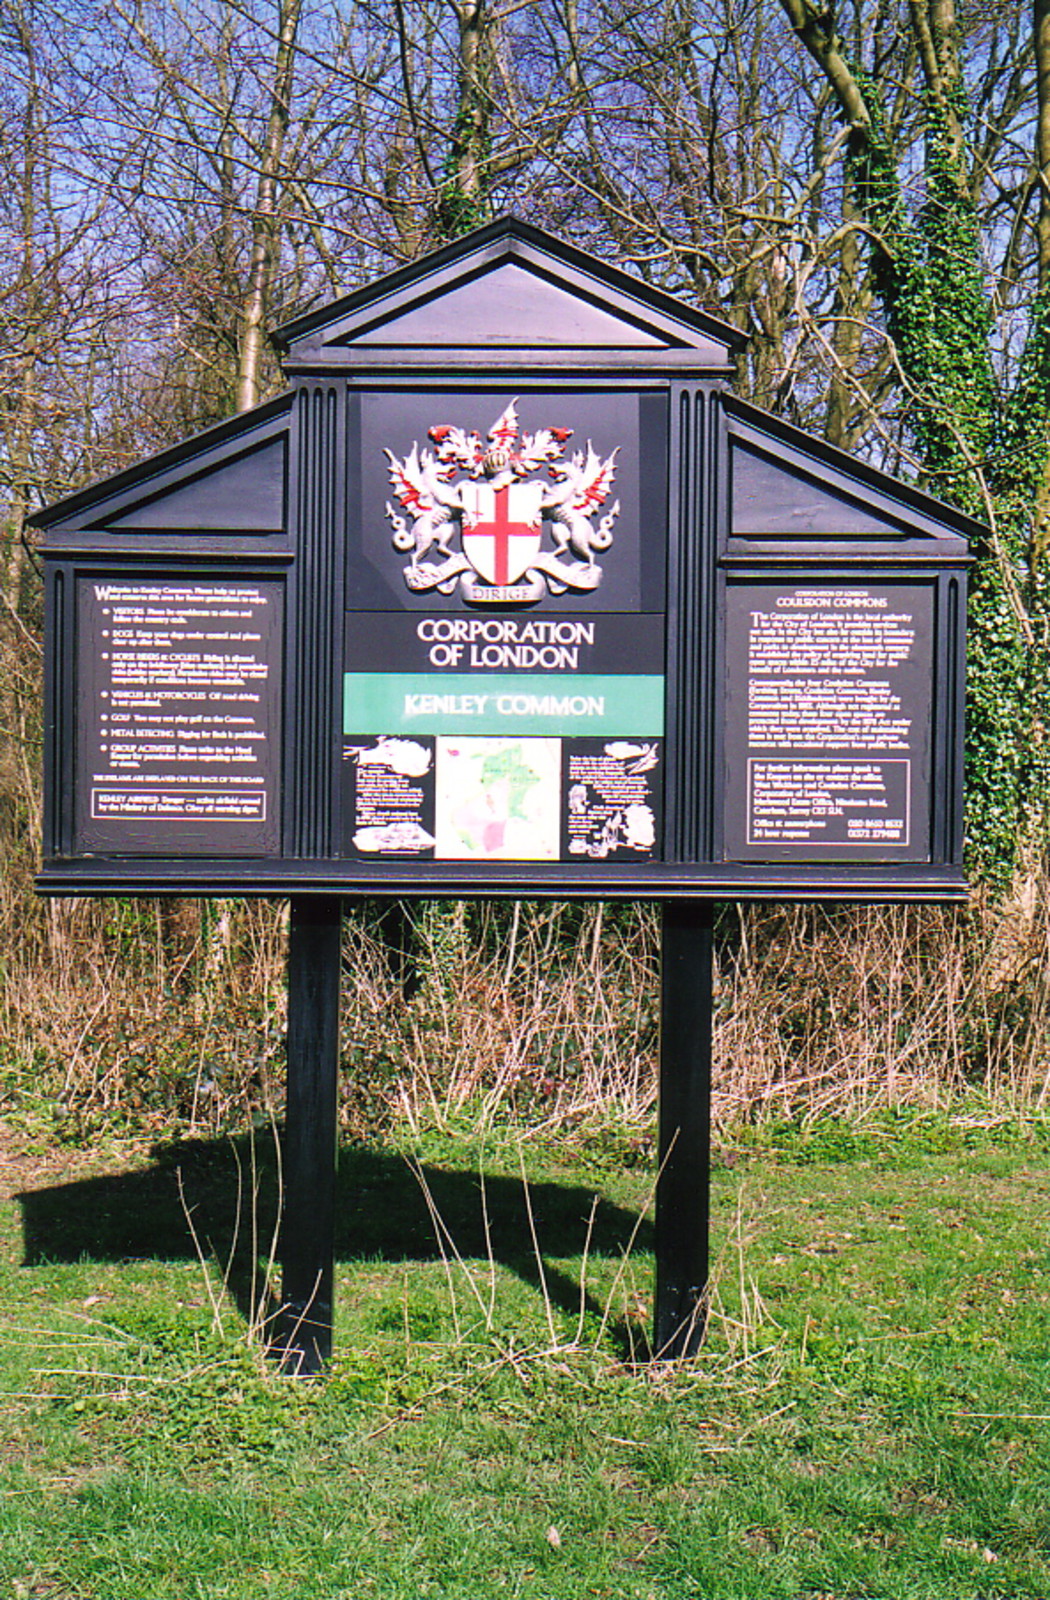 The Corporation of London sign for Kenley Common